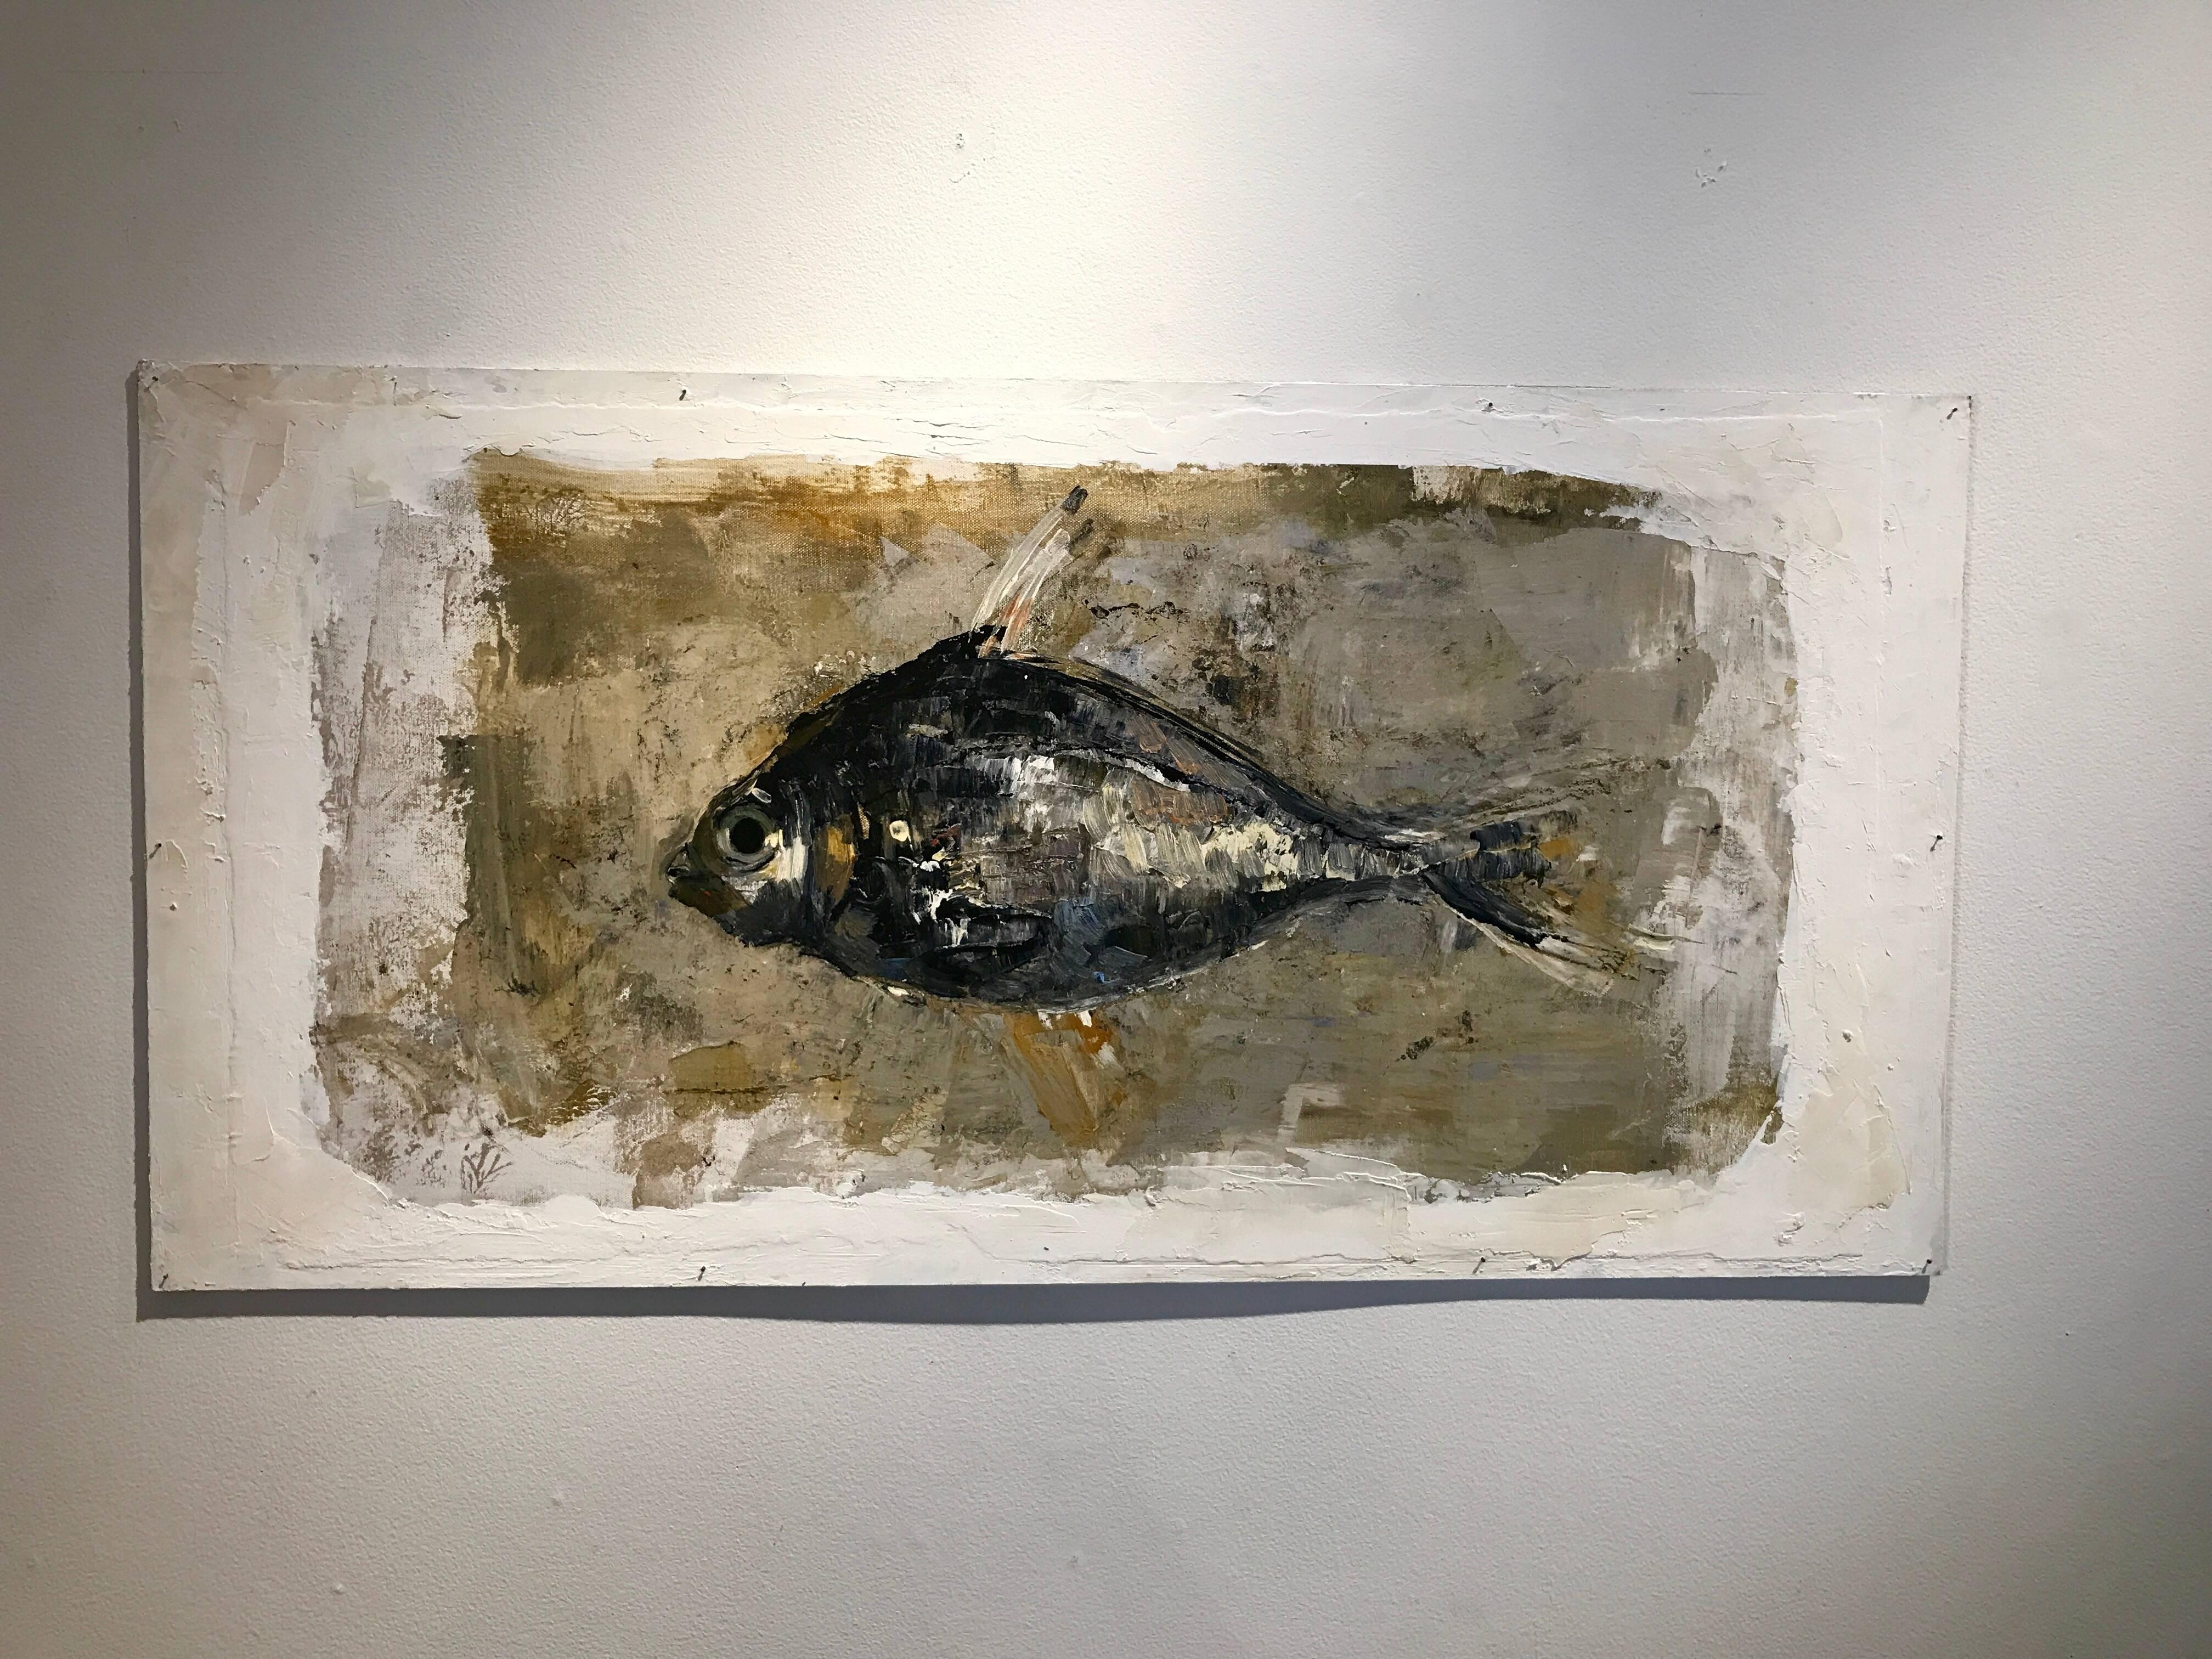 waxy texture with palette knife, neutrals and white tones, portrait of fish on the center, roughly painted border, painterly and antique style

Ġoxwa (also written Goxwa) began painting at a very young age and enrolled at the Saint Martin School of